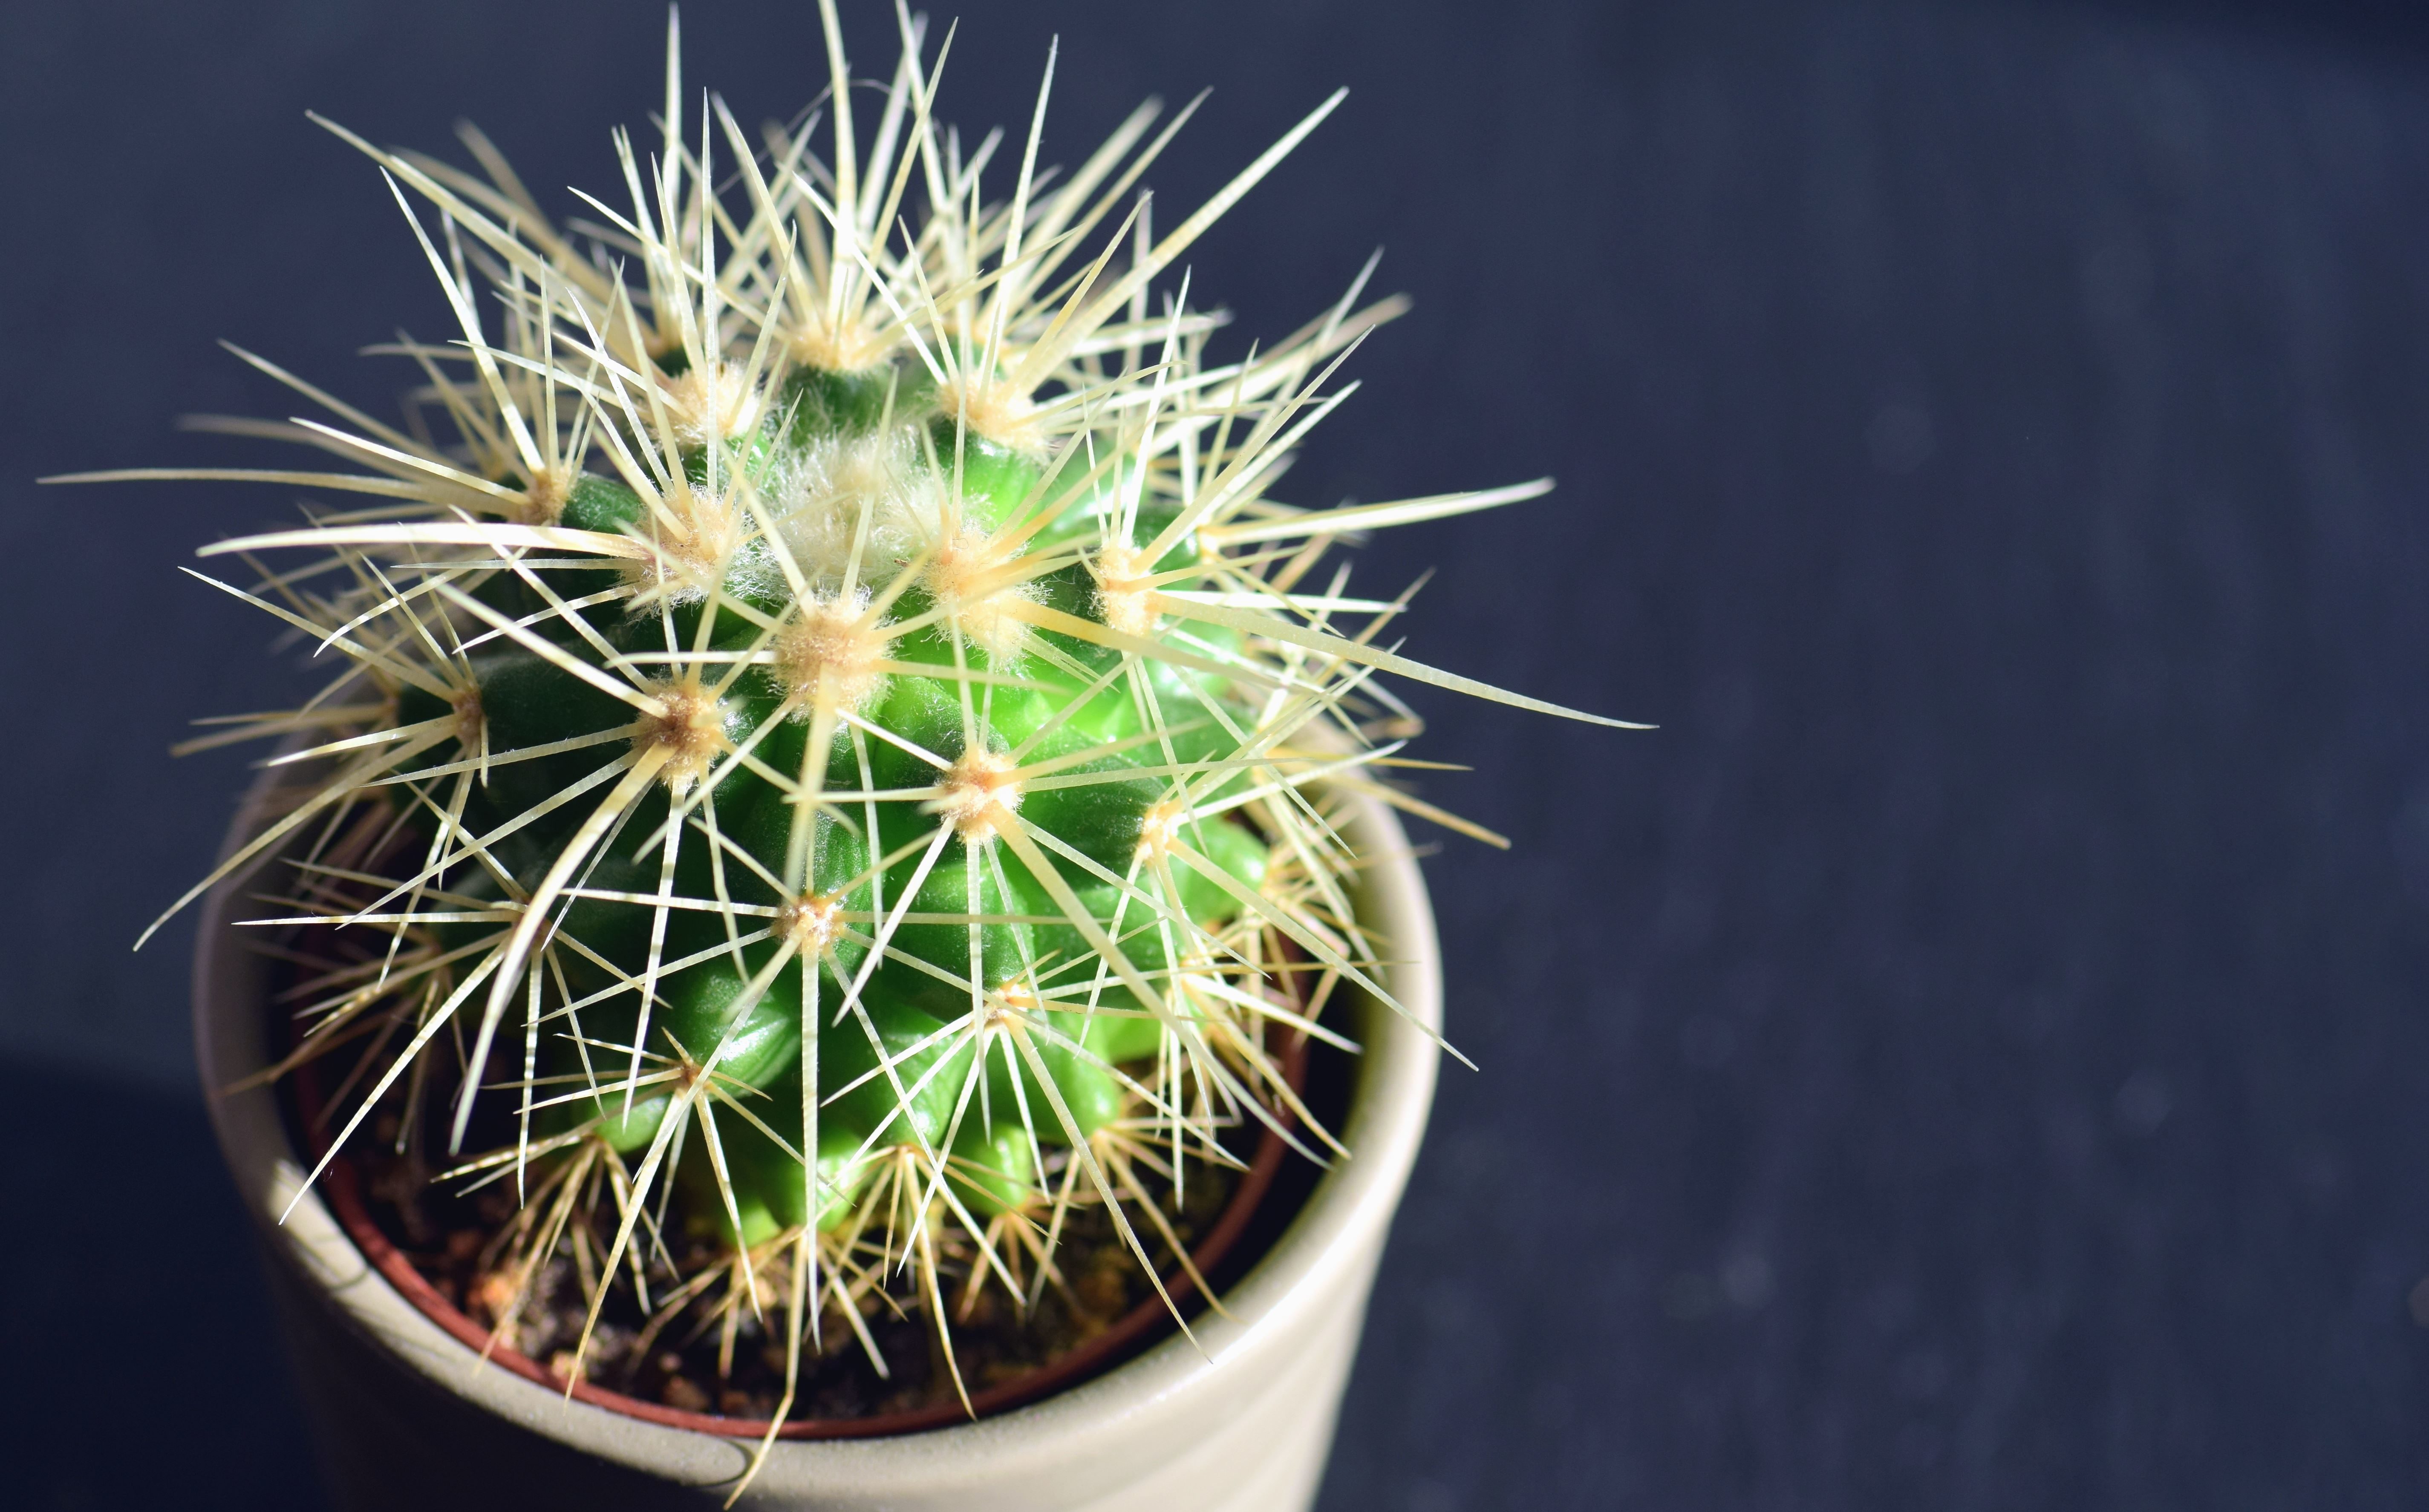 Free picture: cactus, plant, flower pot, thorn, flower